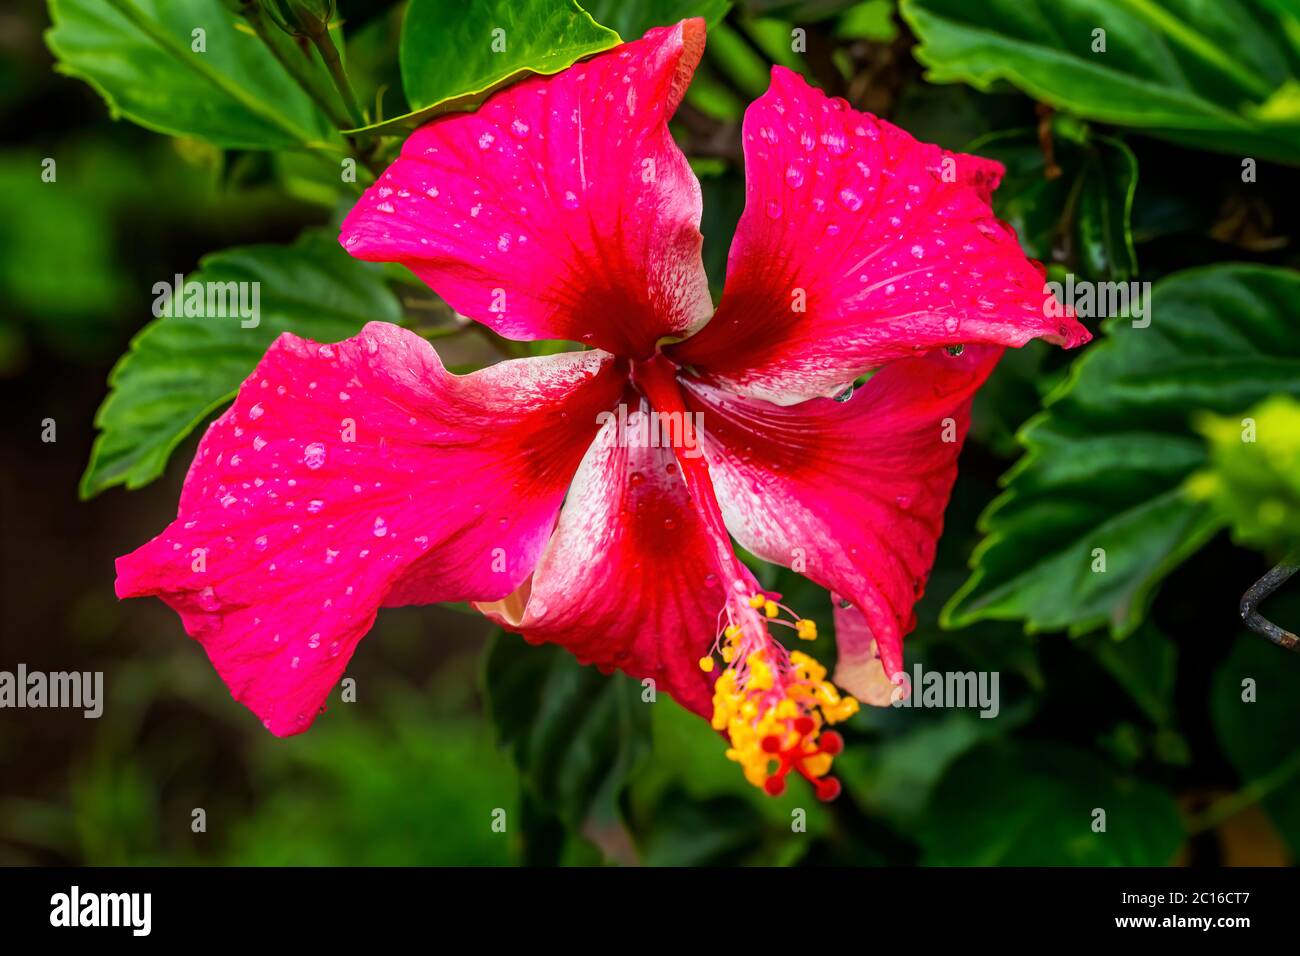 Catch My Breath Red Tropical Hibiscus Flowers Green Leaves Easter Island Chile.  Tropical hibiscus has many varieties. Stock Photo